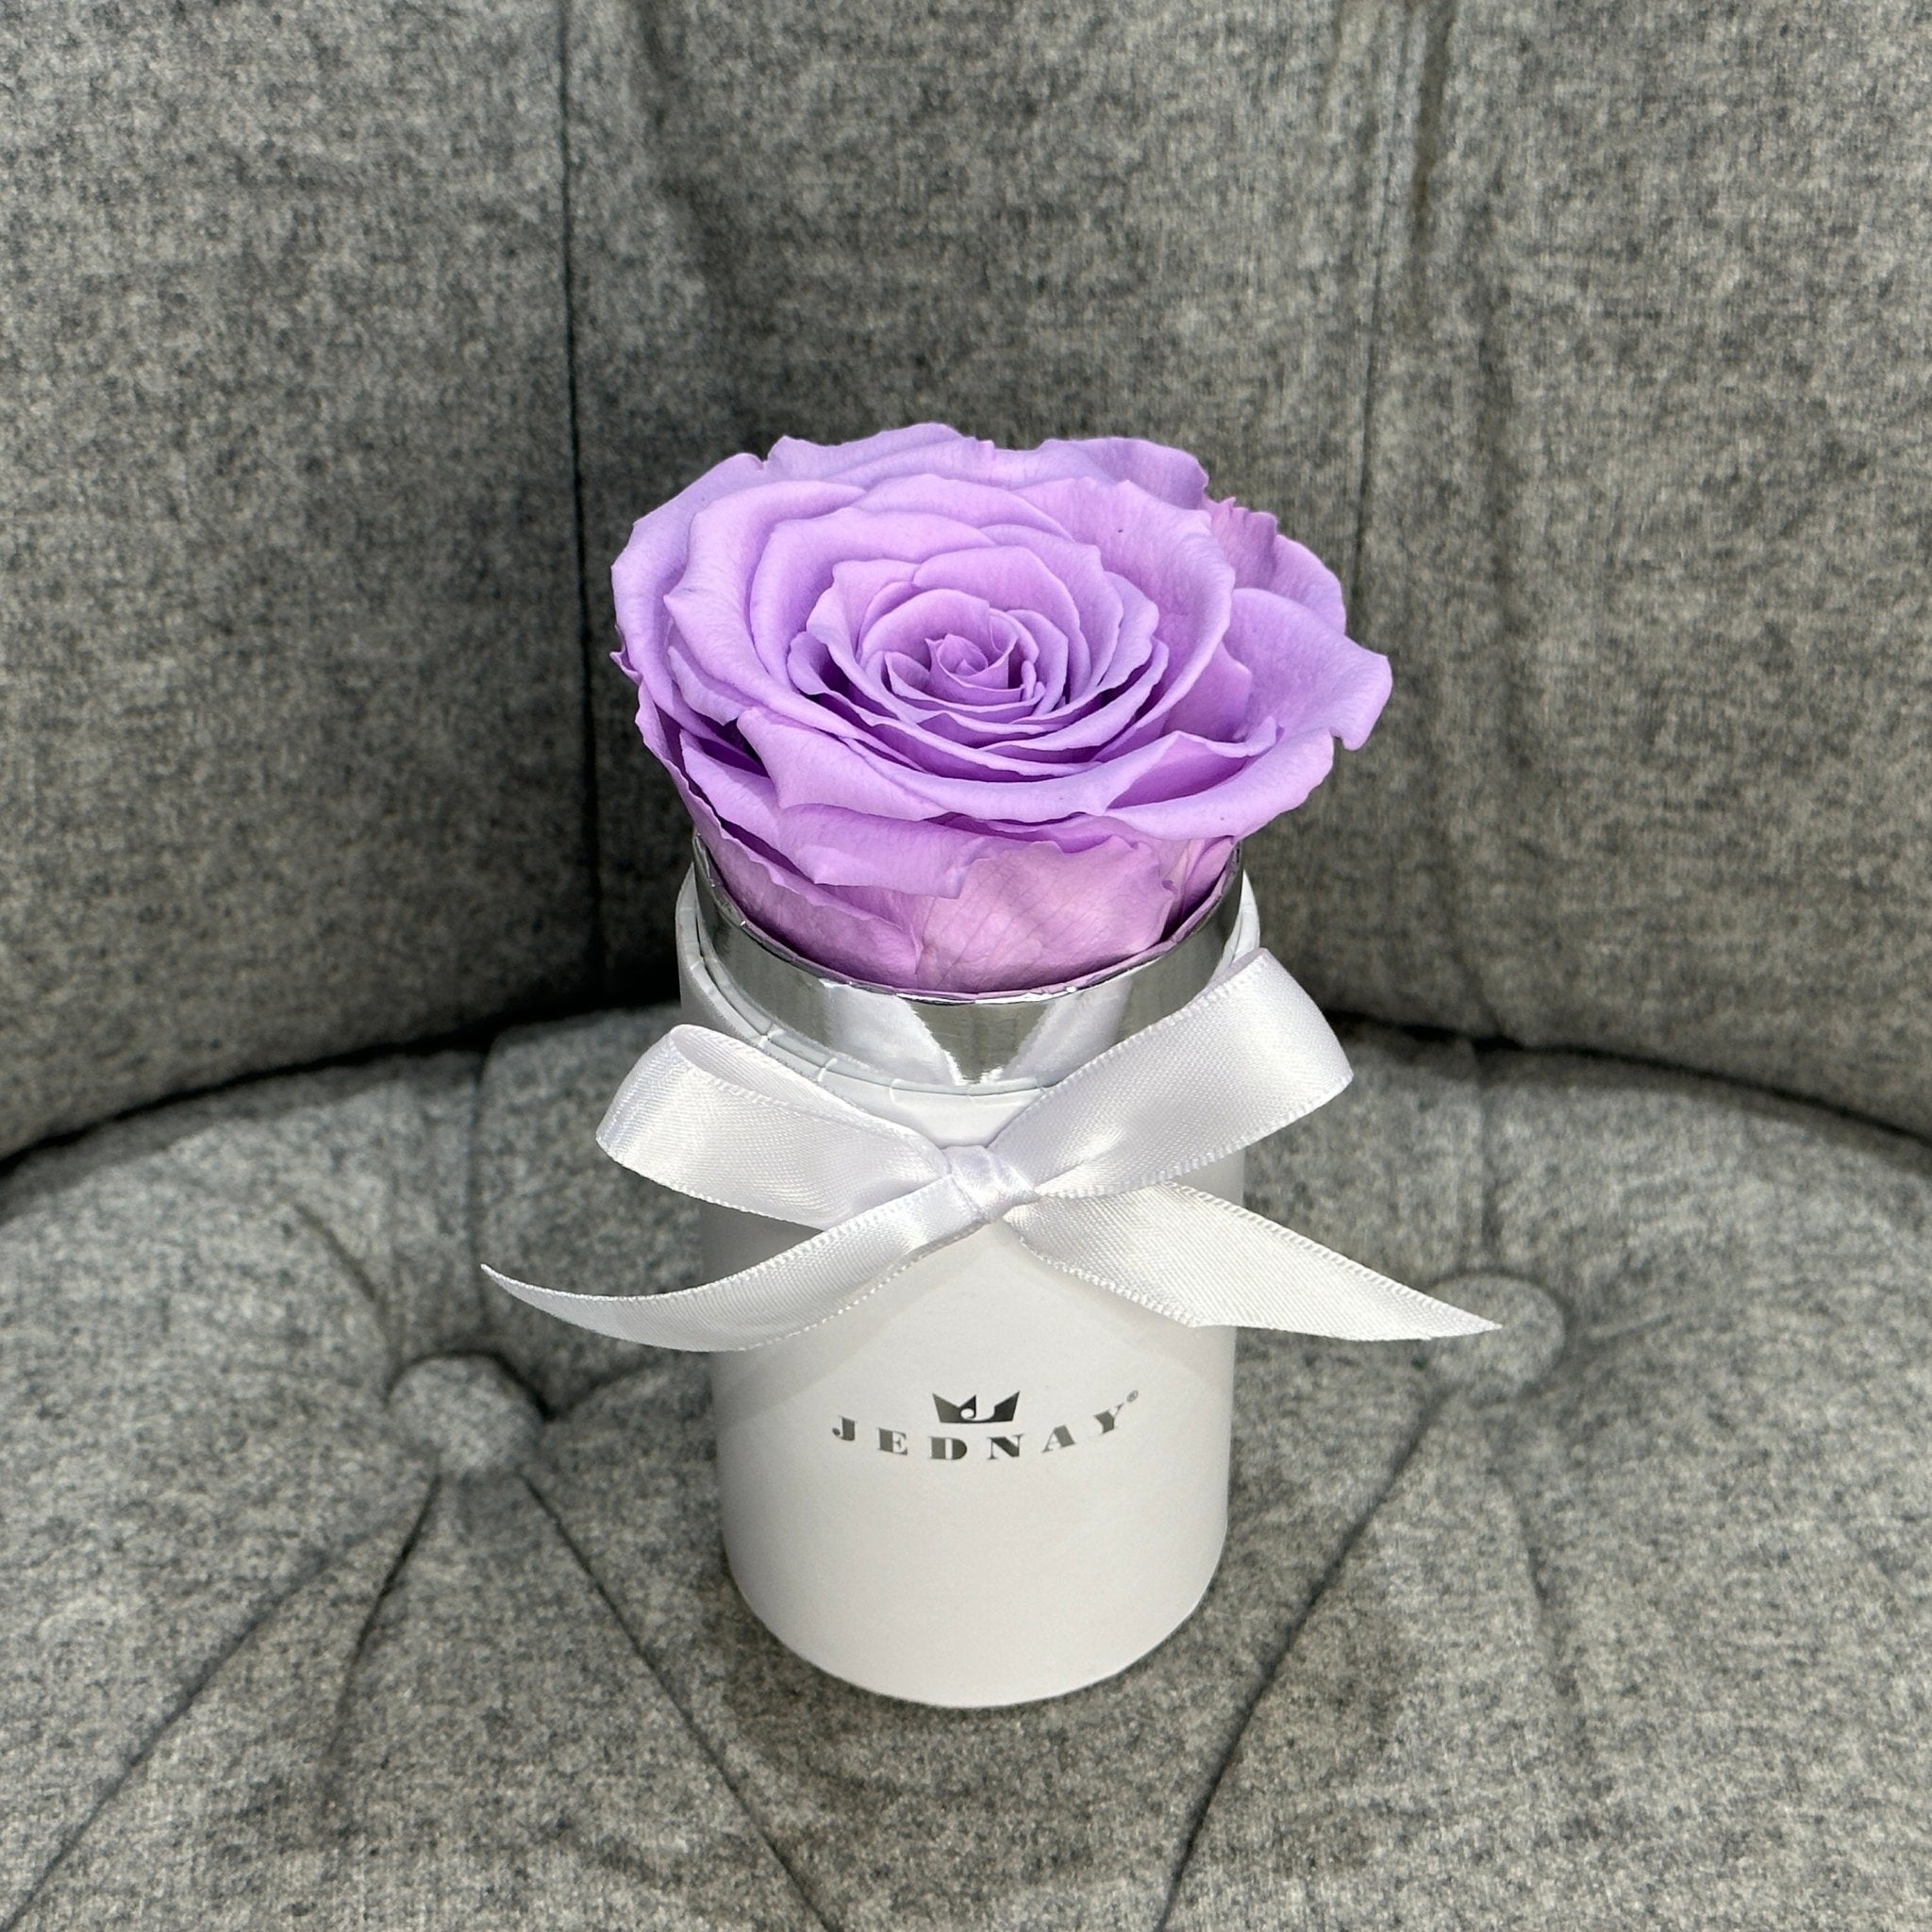 The Uno - Lilac Love Eternal Rose - Classic White Box - Jednay Roses